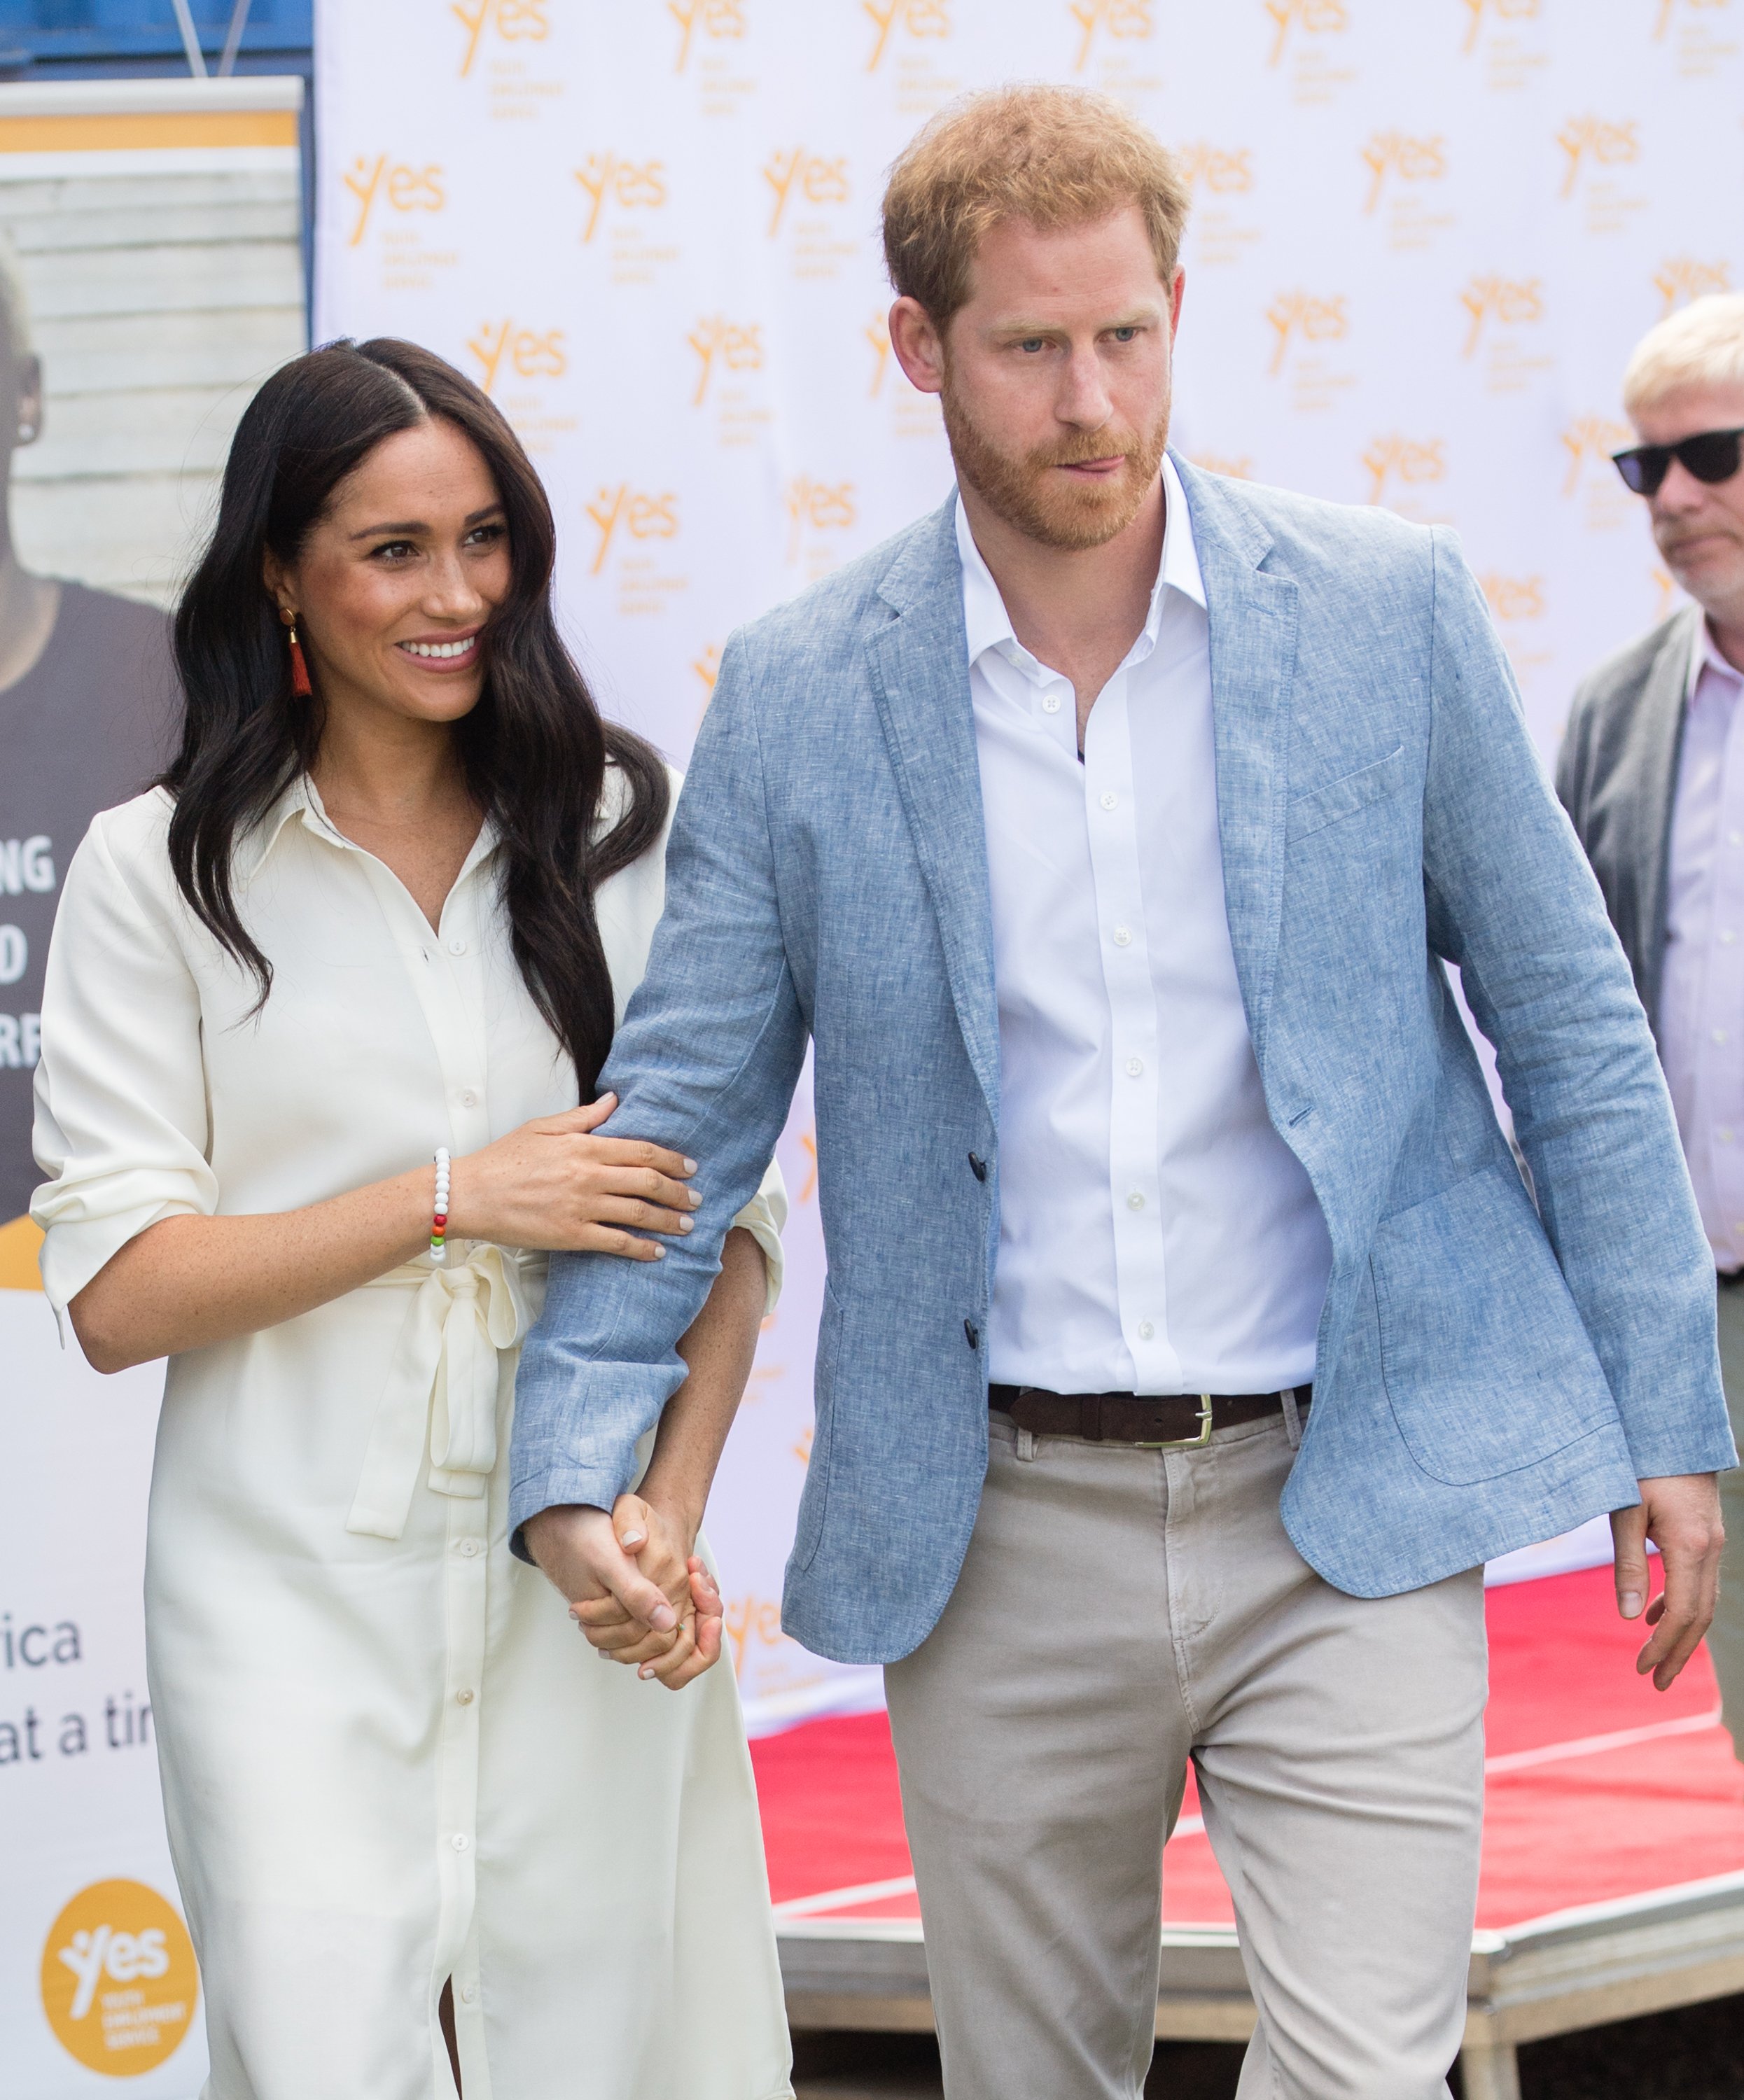 Prince Harrye, Duke of Sussex and Meghan, Duchess of Sussex visit the Tembisa Township to learn about Youth Employment Services on October 02, 2019 in Tembisa, South Africa. | Source: Getty Images